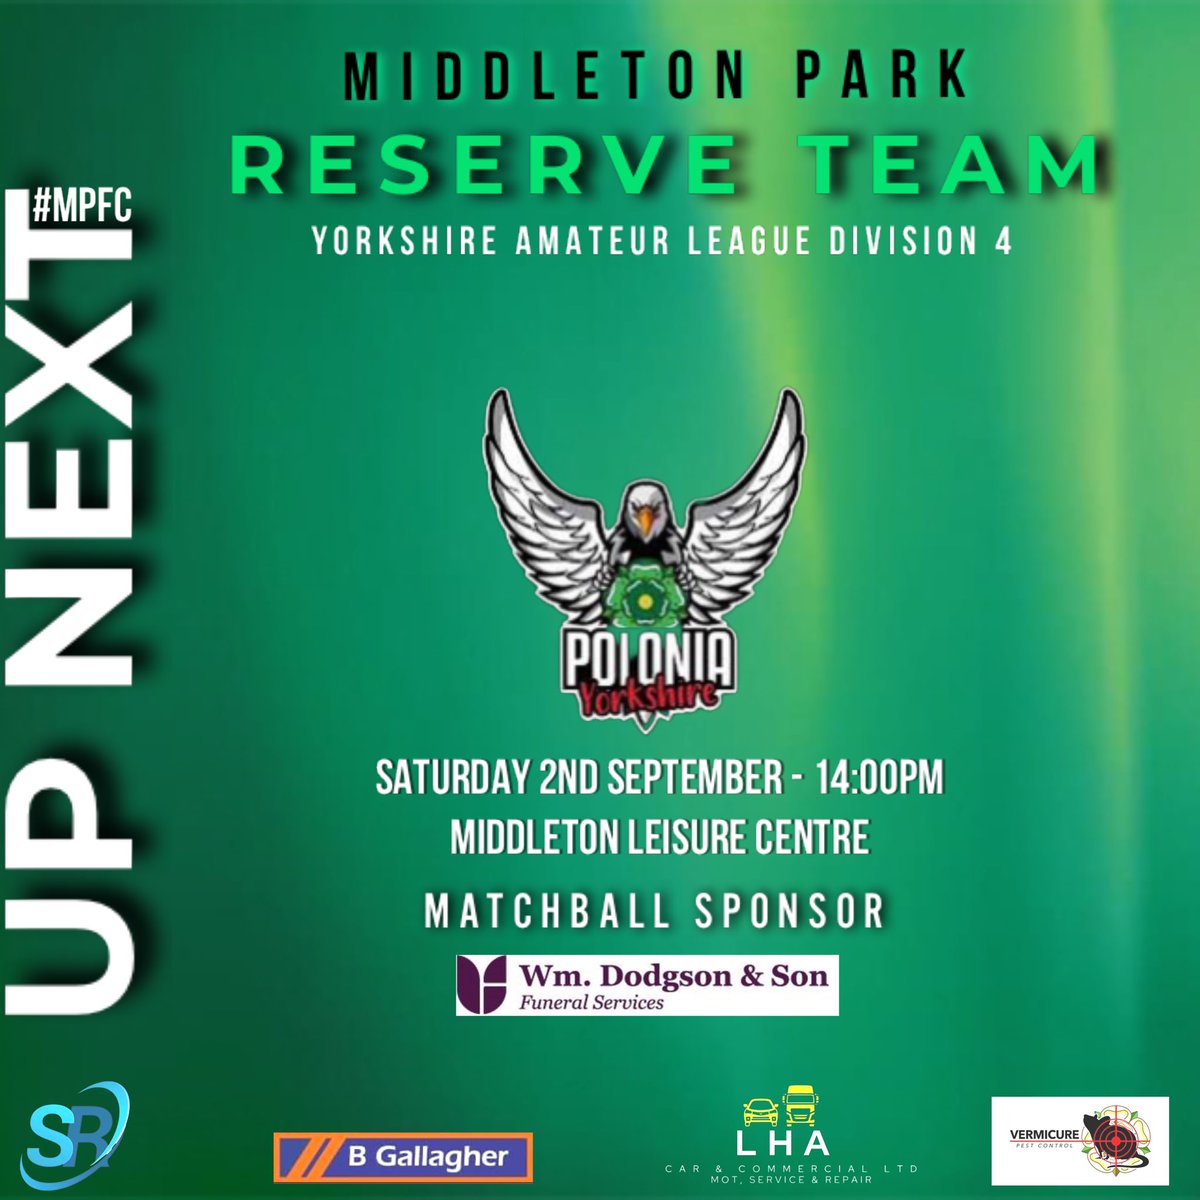 𝗡𝗲𝘅𝘁 𝘂𝗽 

It’s what we’ve all been waiting for!!

The season finally gets underway for both our open age teams. 

Middleton Park Res v @polonia2020 Res 

@rammers46 v Middleton Park